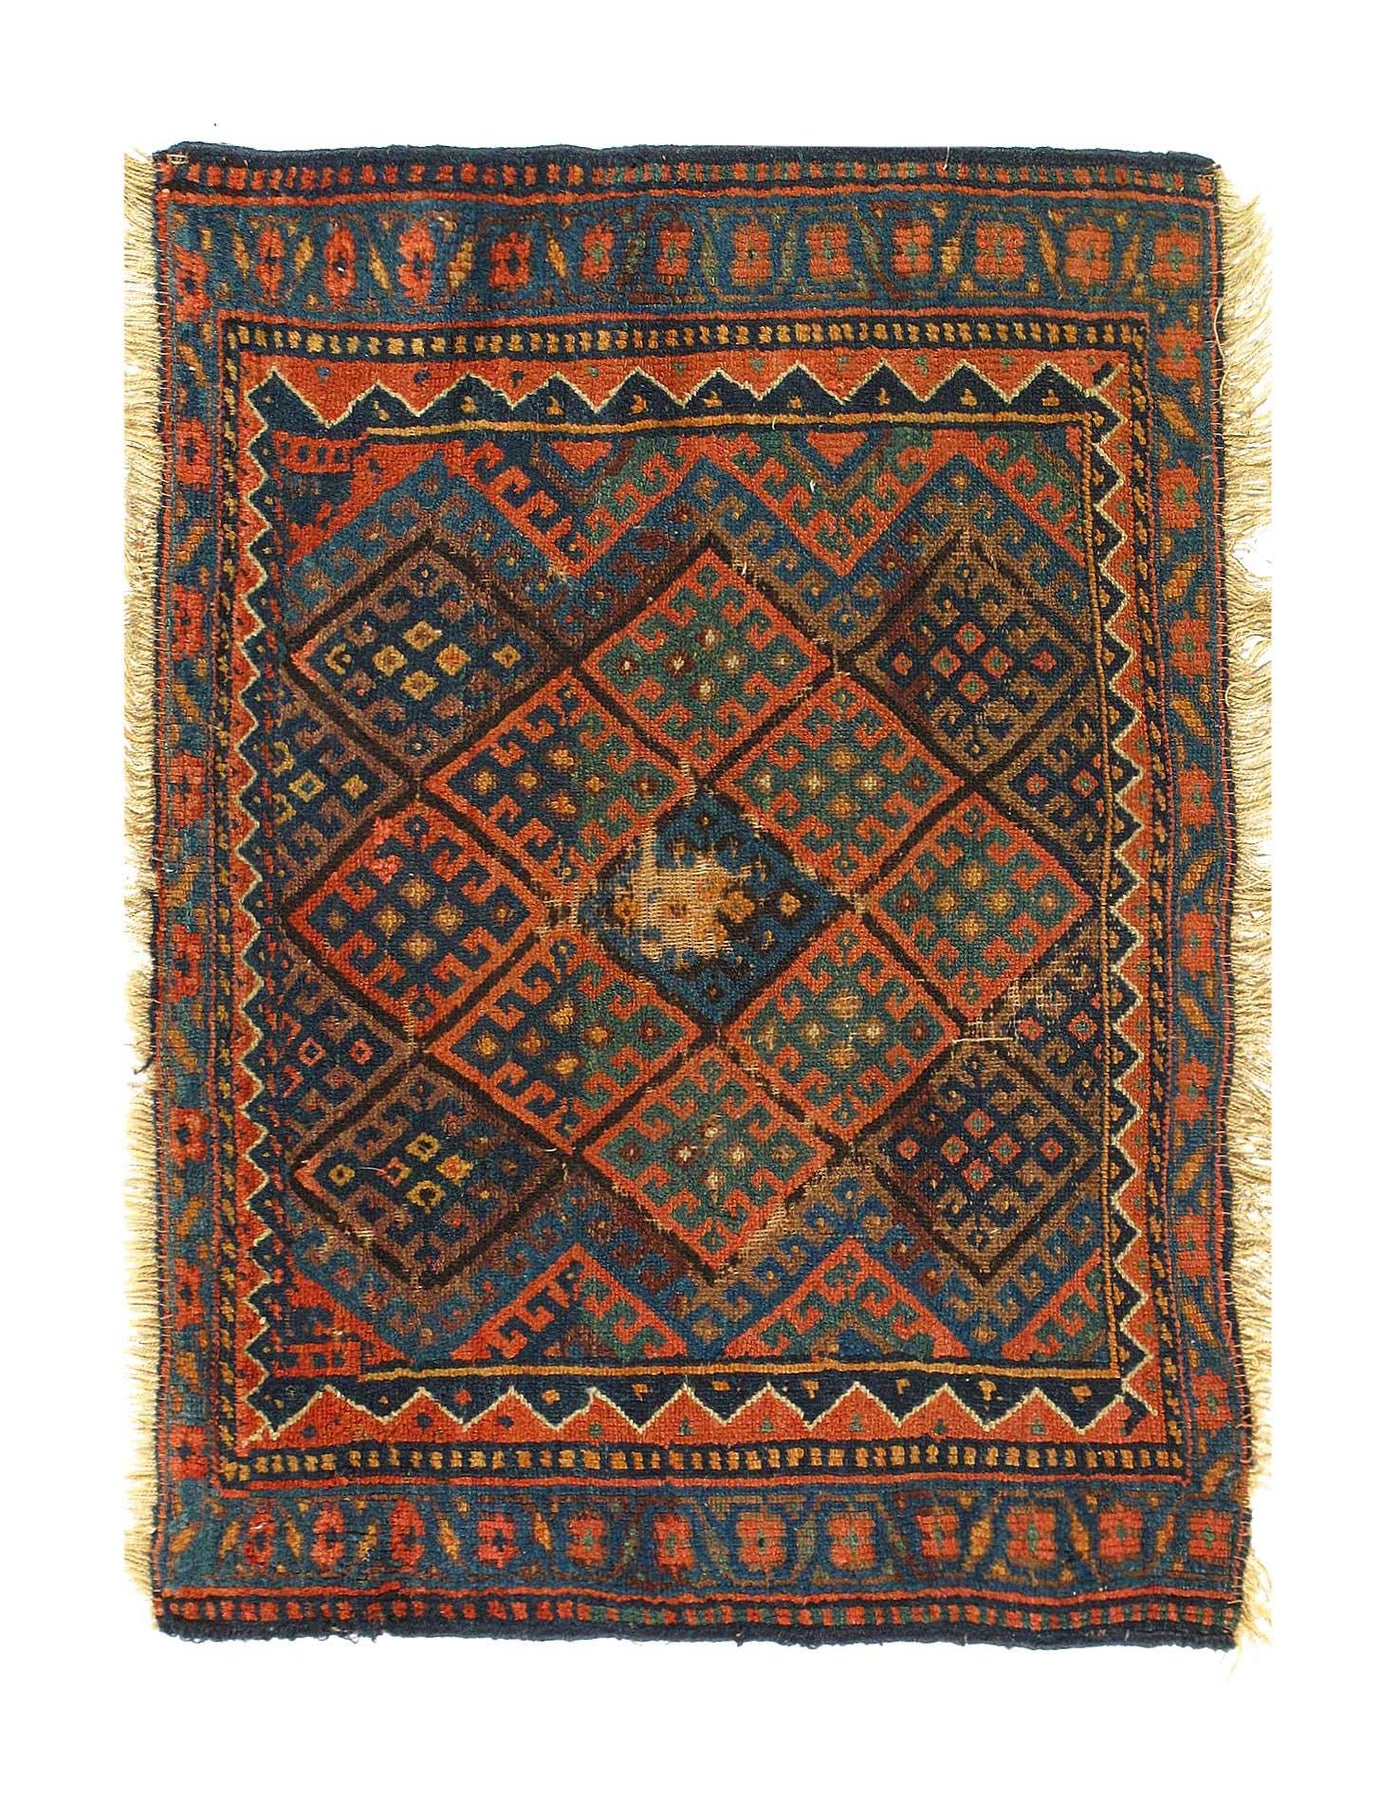 Canvello Antique Hand knotted Kazak rug - 2'X 2'9'' - Canvello